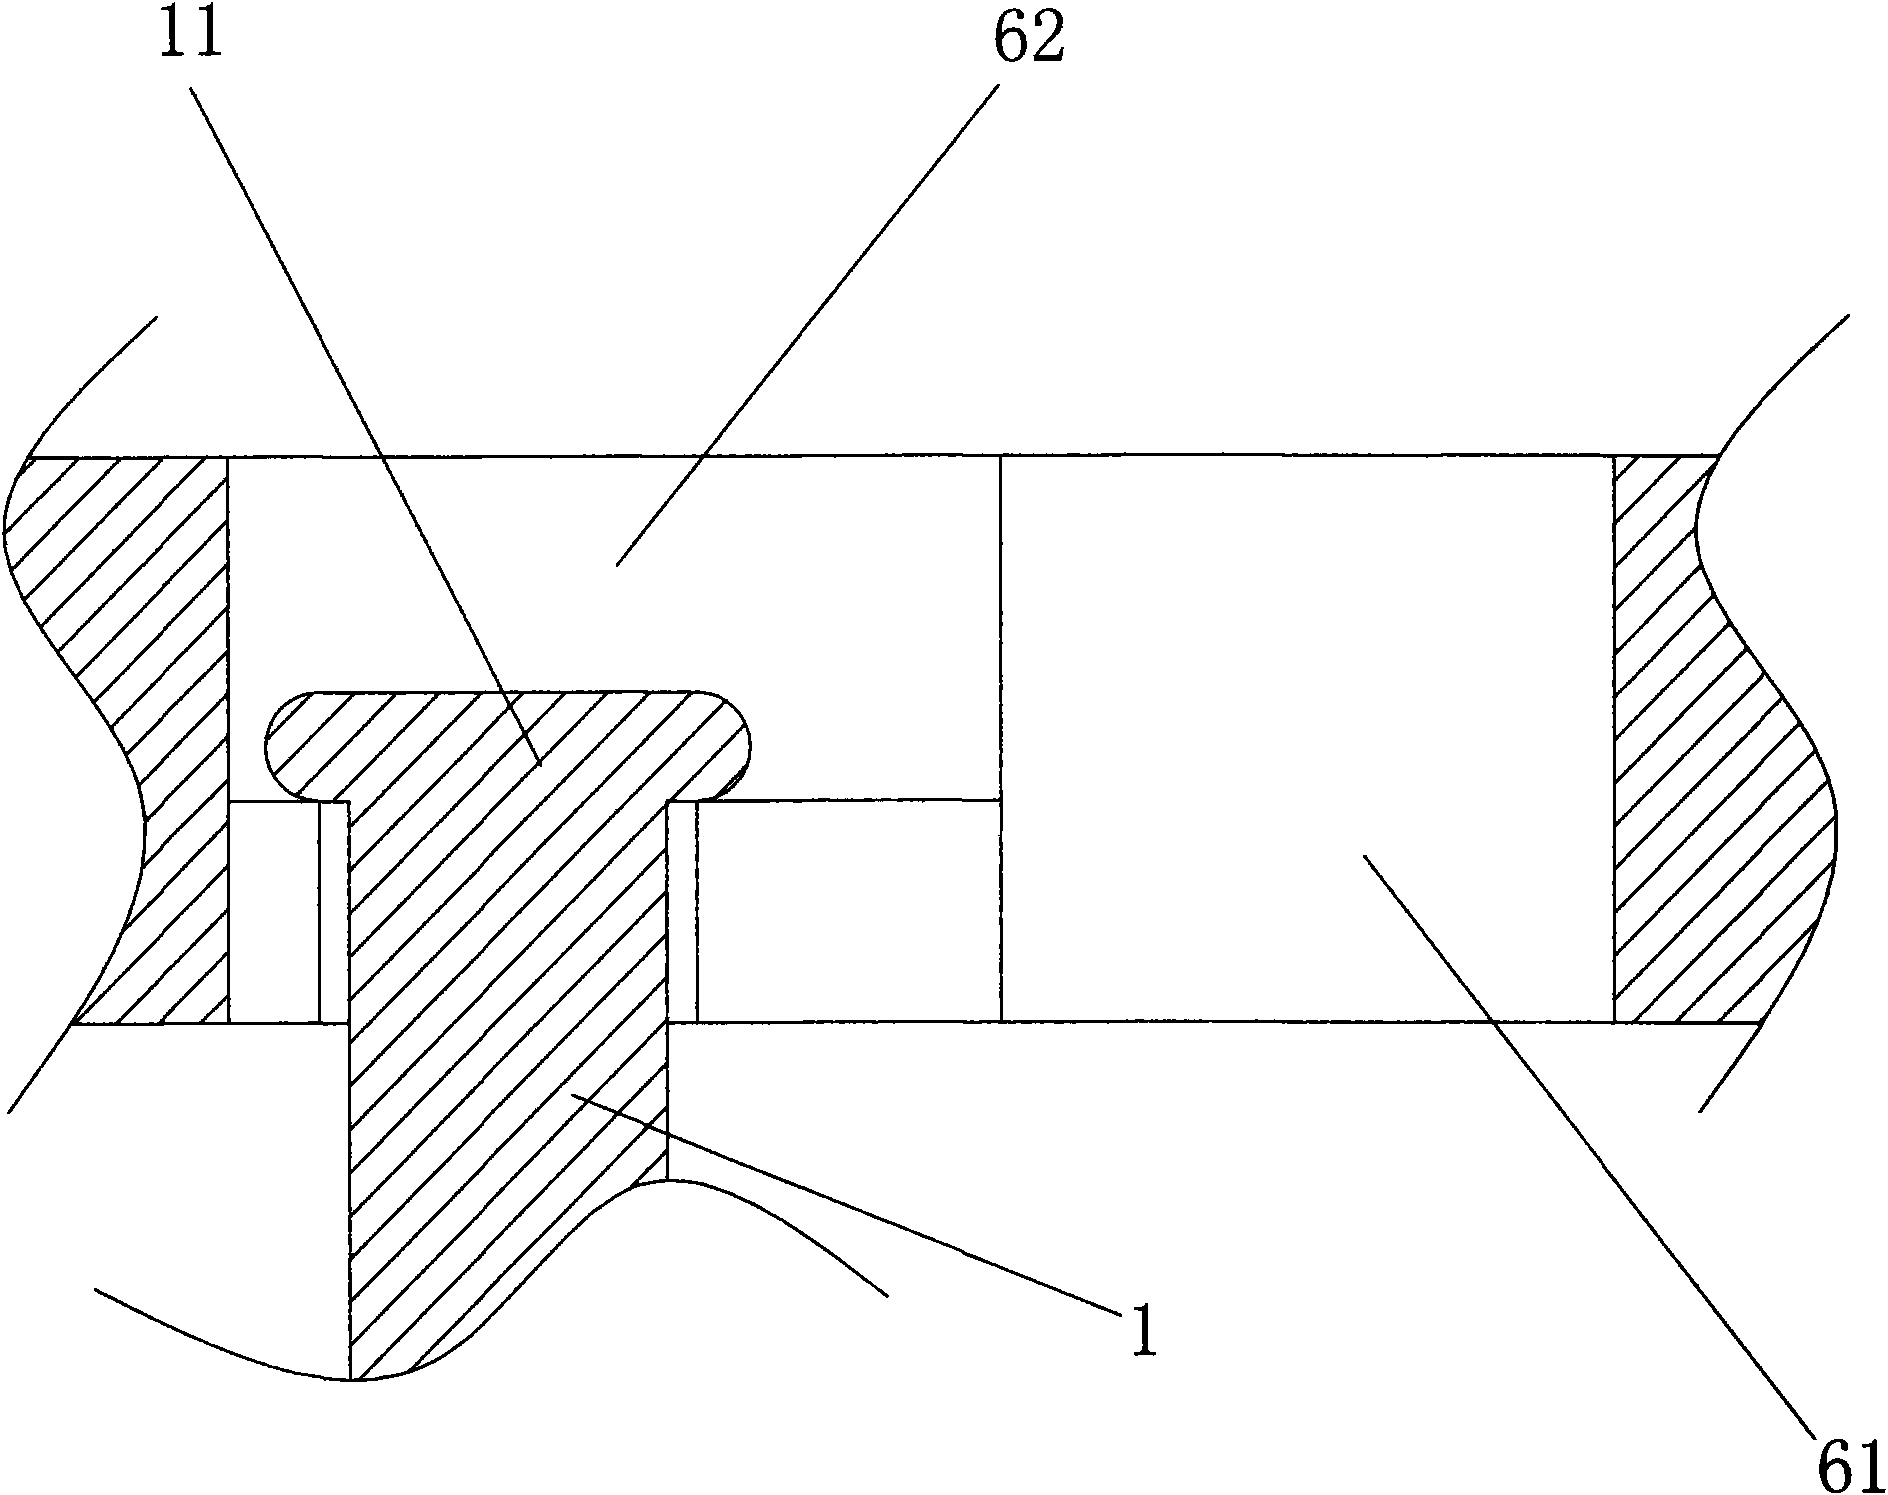 Pretensioned prestressed concrete quadrilateral pile and production method thereof